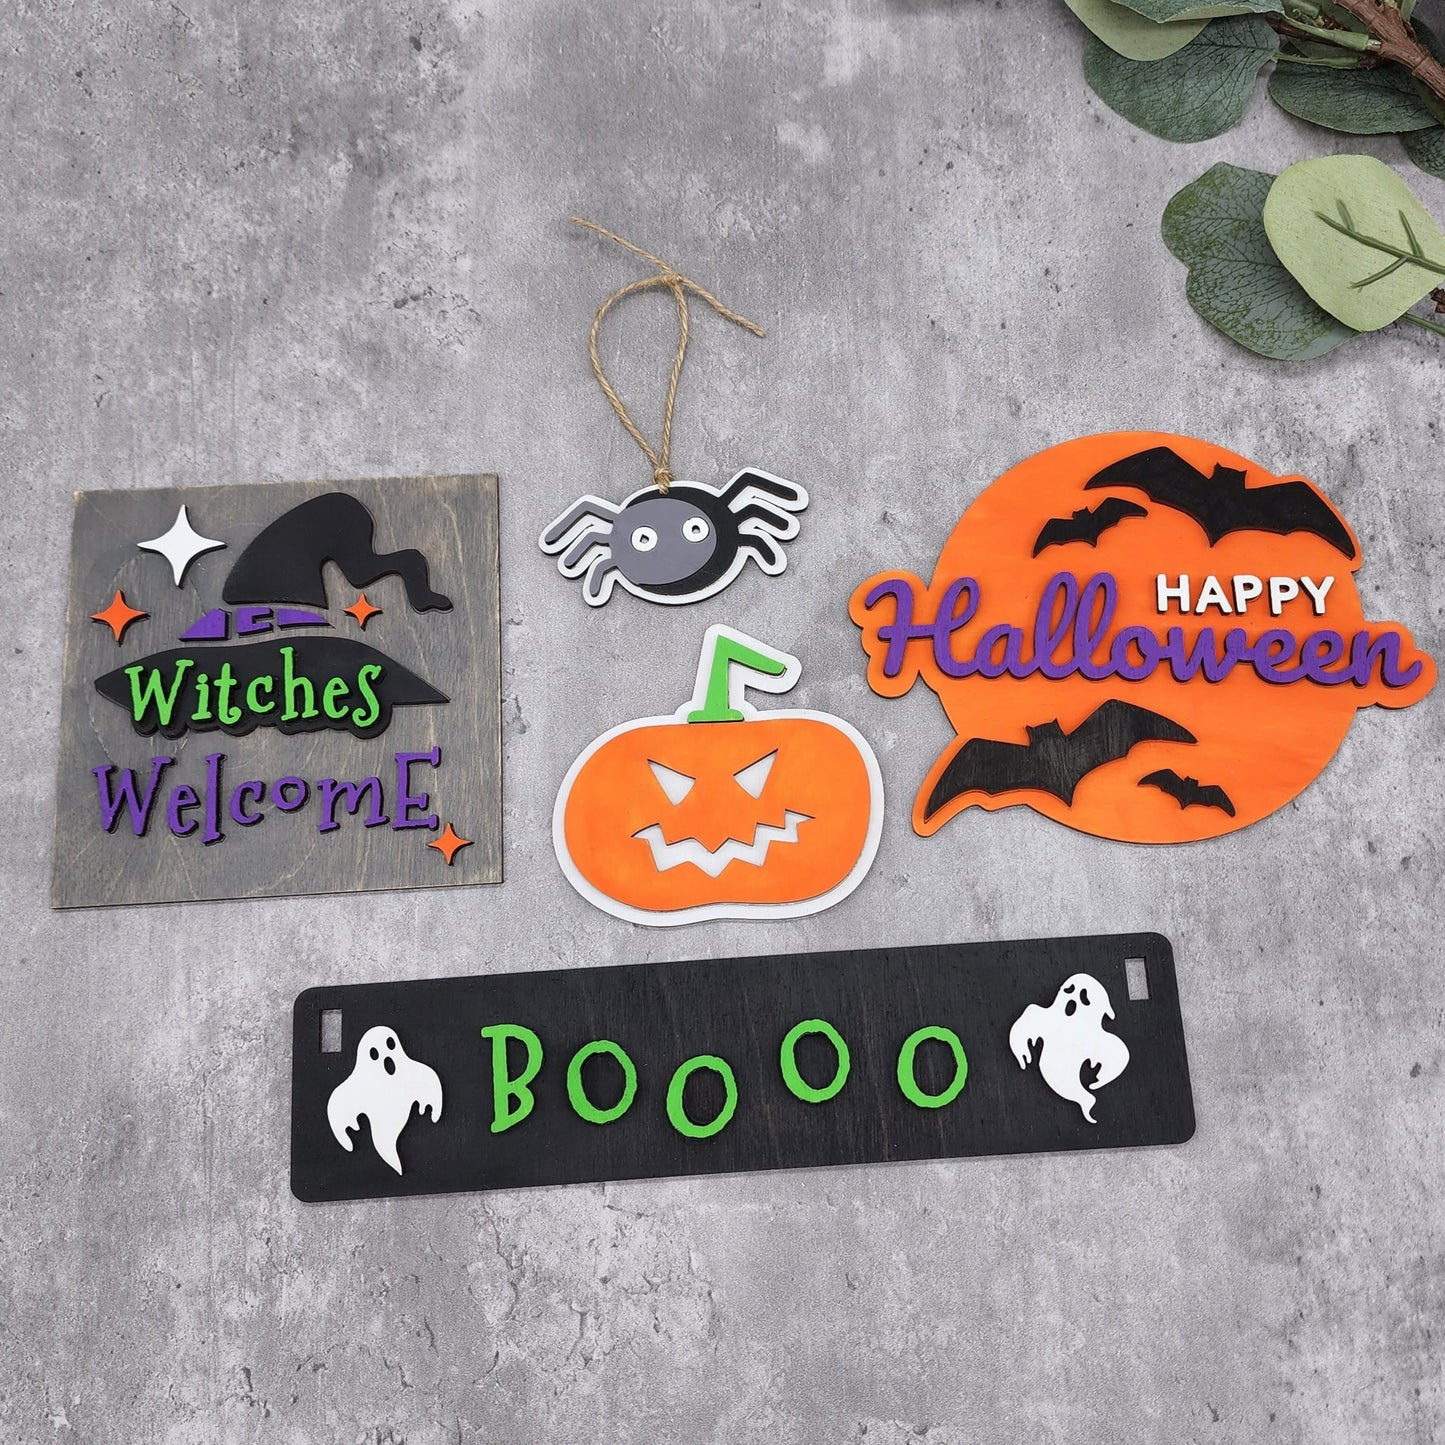 Boo Tier Tray Kit - Add on